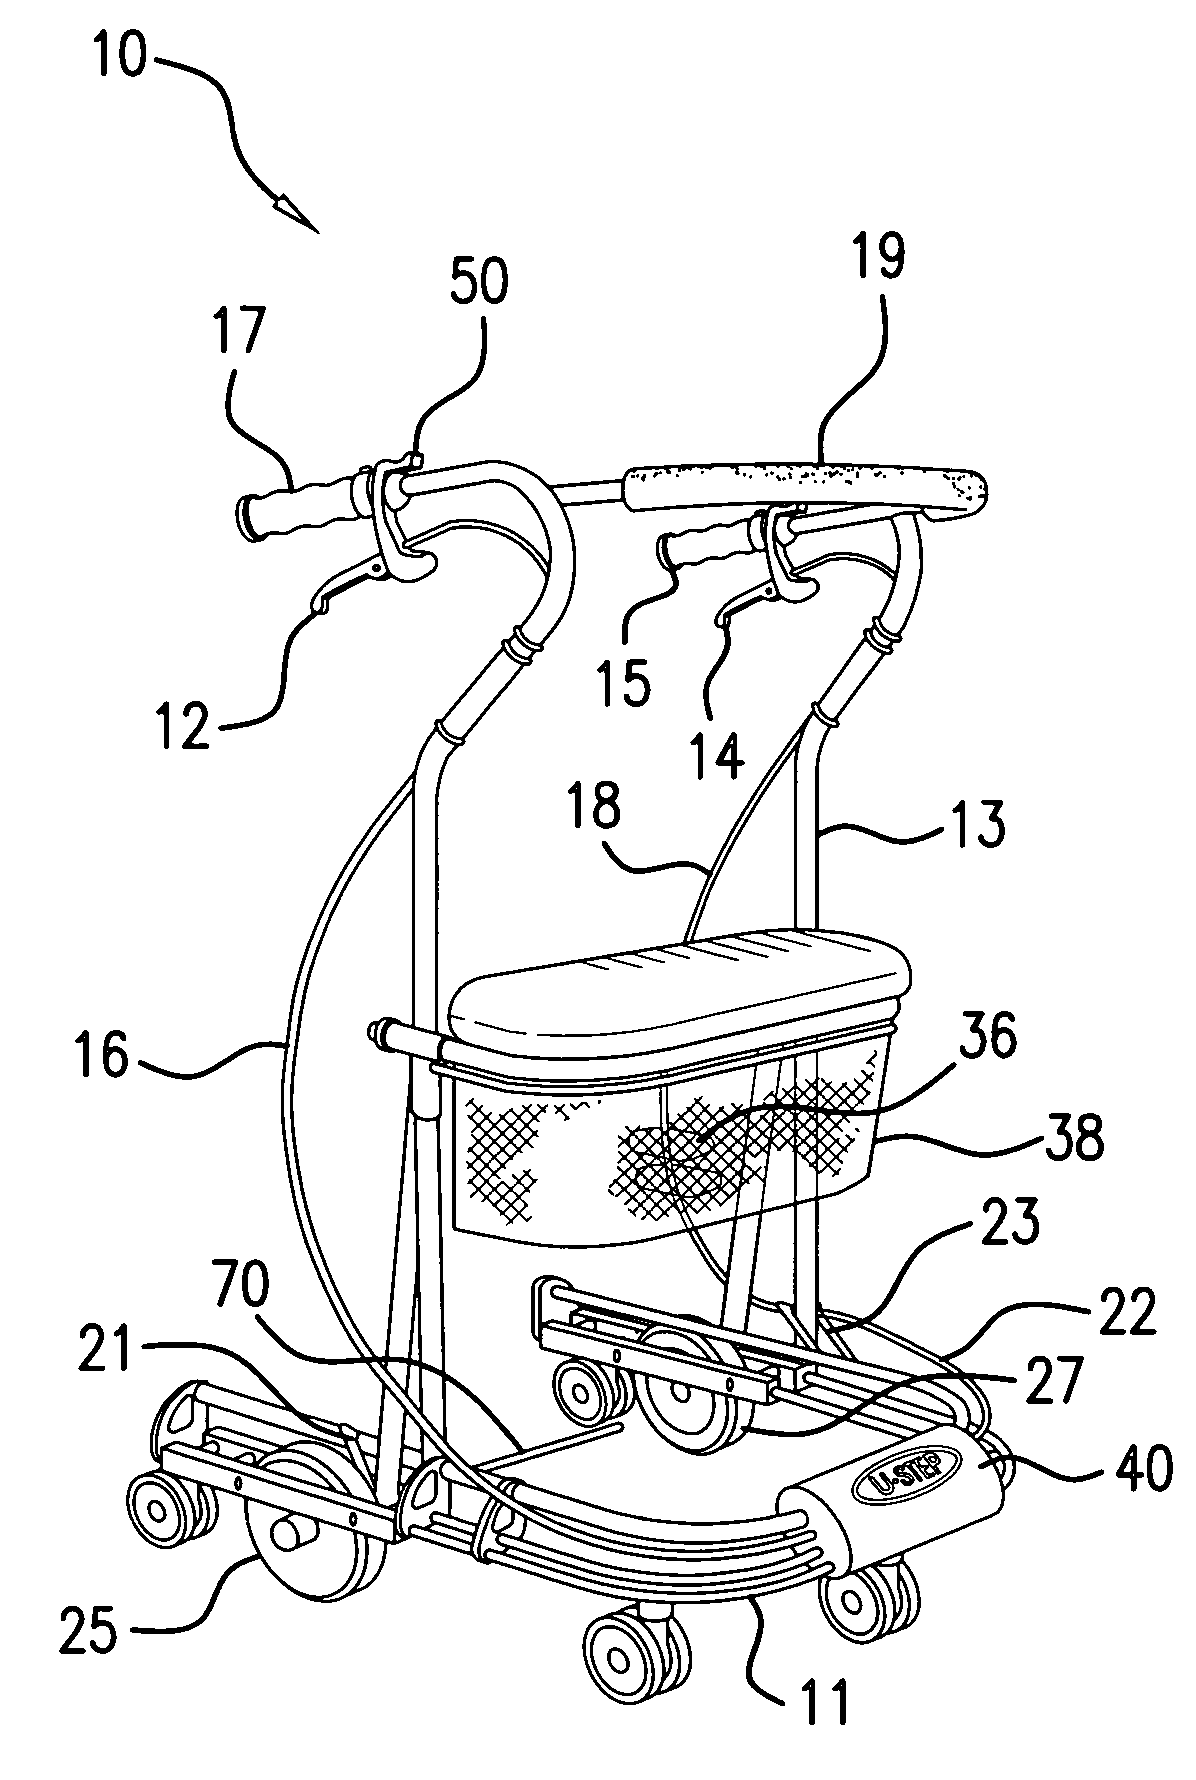 Projection and actuation device for a walking stabilizer